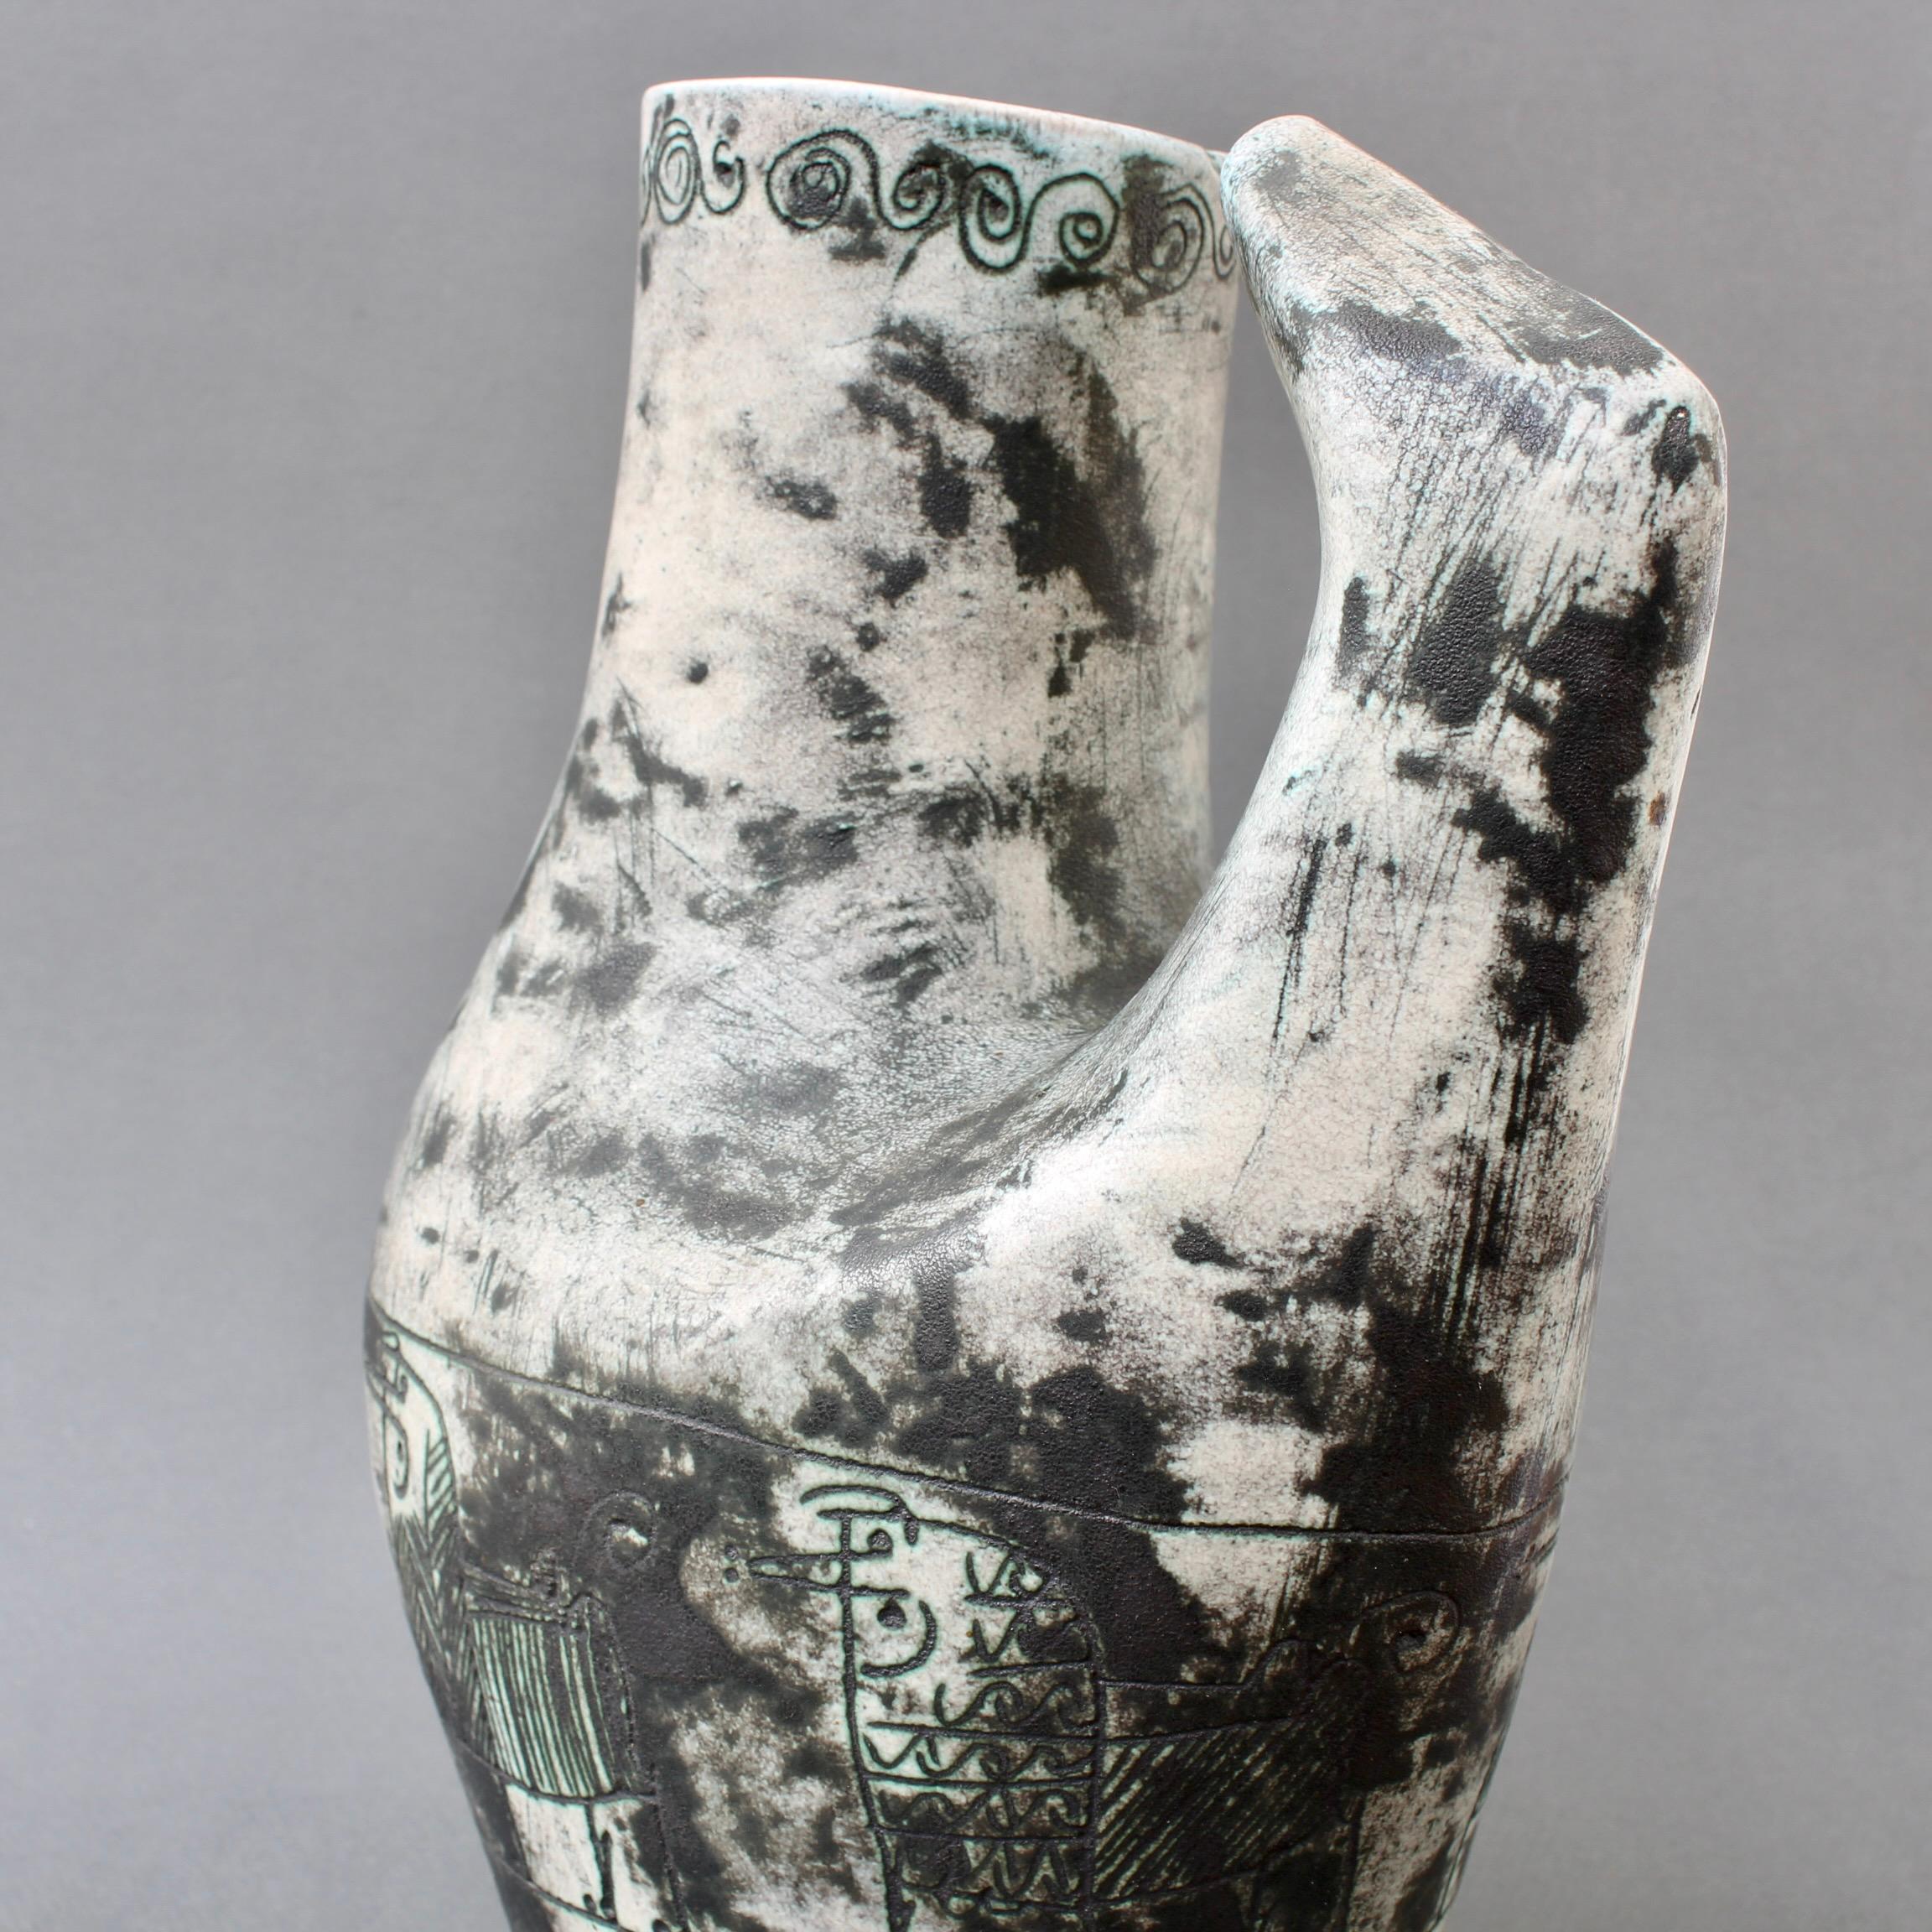 Vintage French Ceramic Zoomorphic Pitcher by Jacques Blin 'circa 1950s' For Sale 10